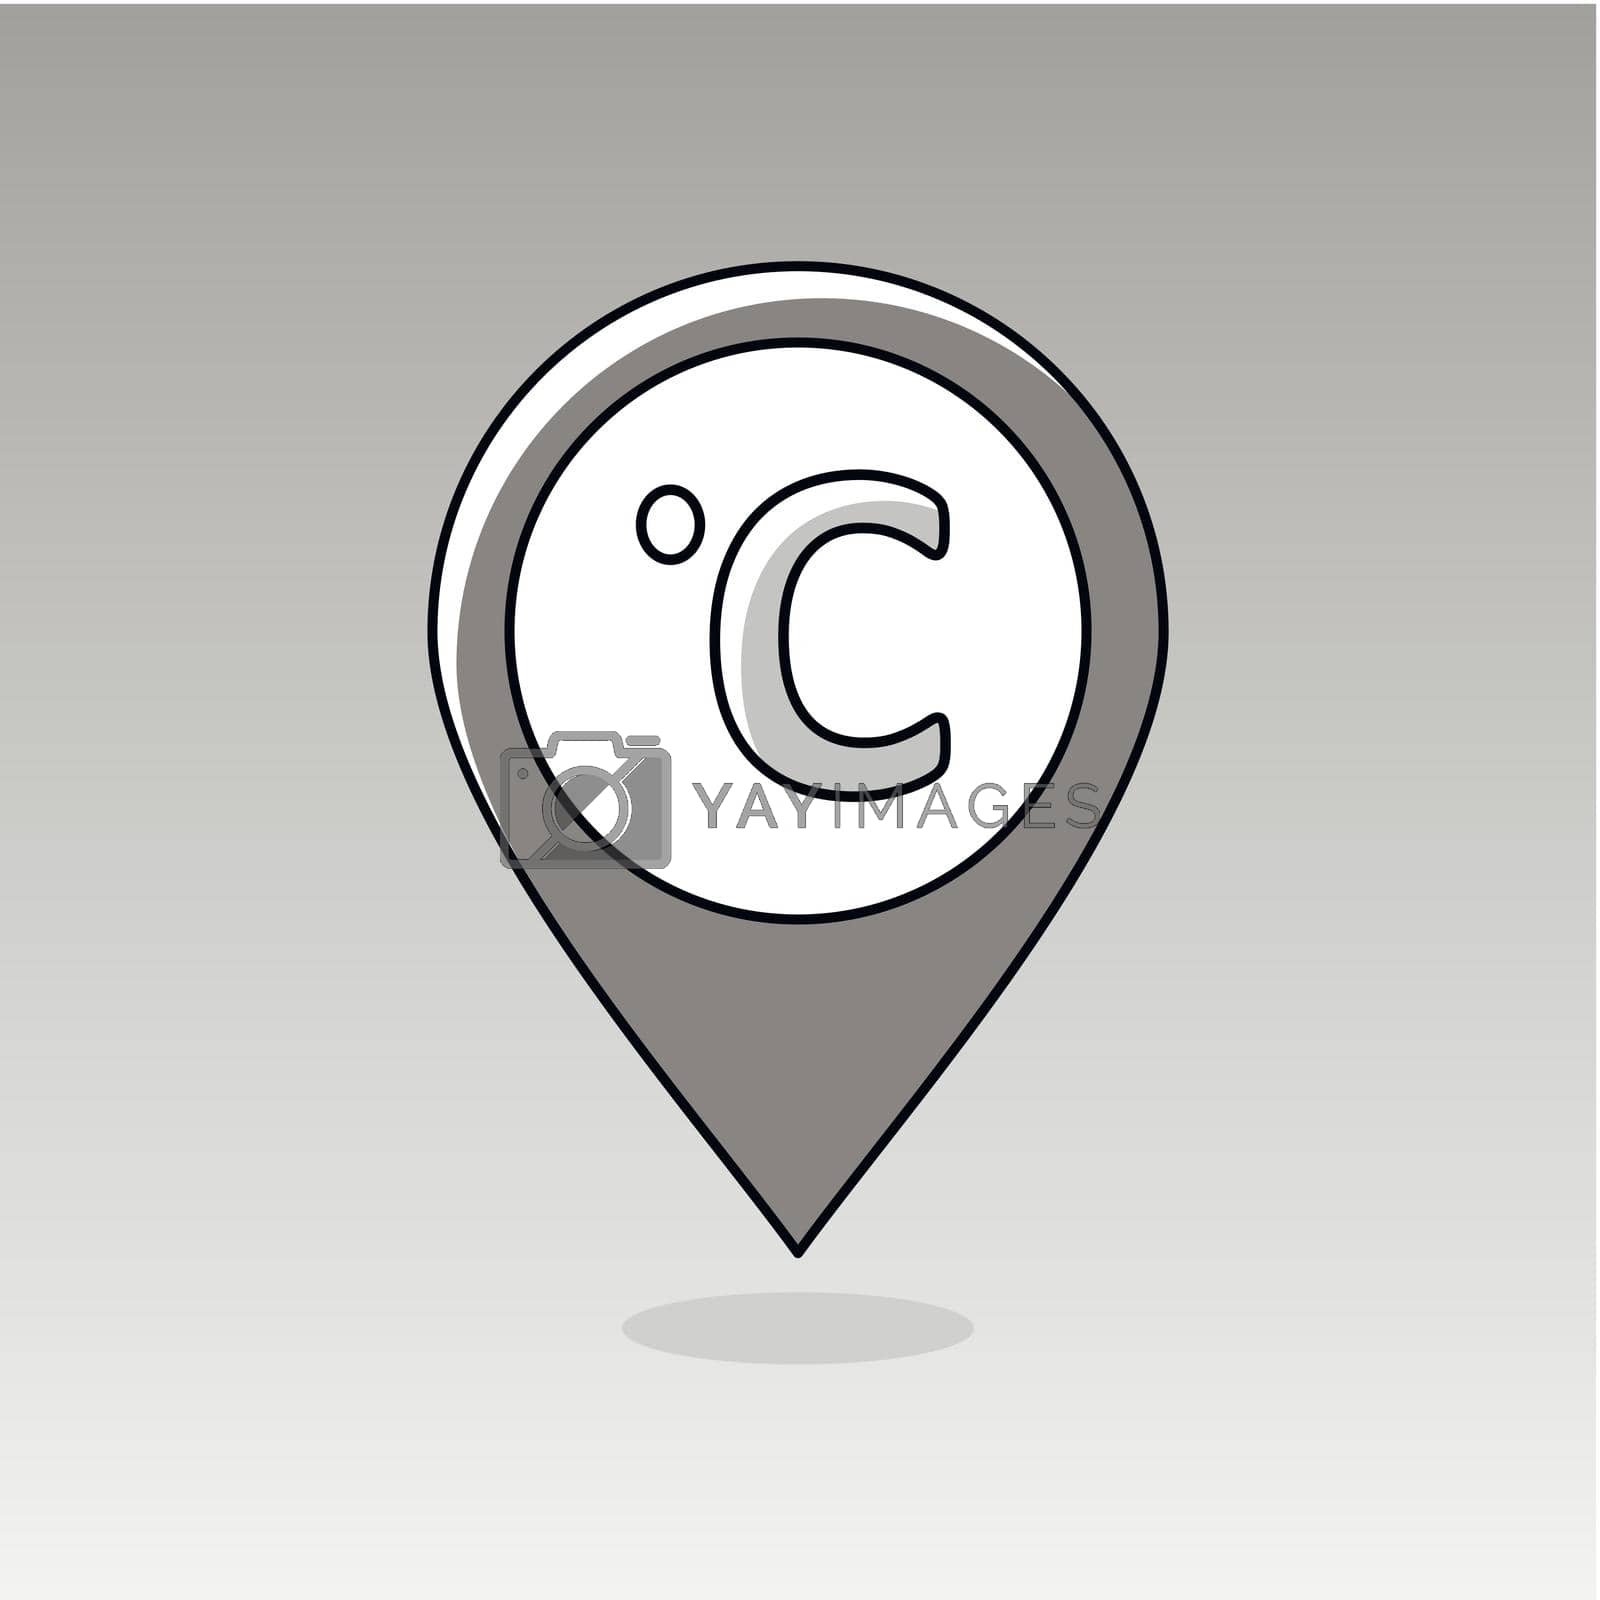 Degrees Celsius outline pin map icon. Map pointer. Map markers. Meteorology. Weather. Vector illustration eps 10